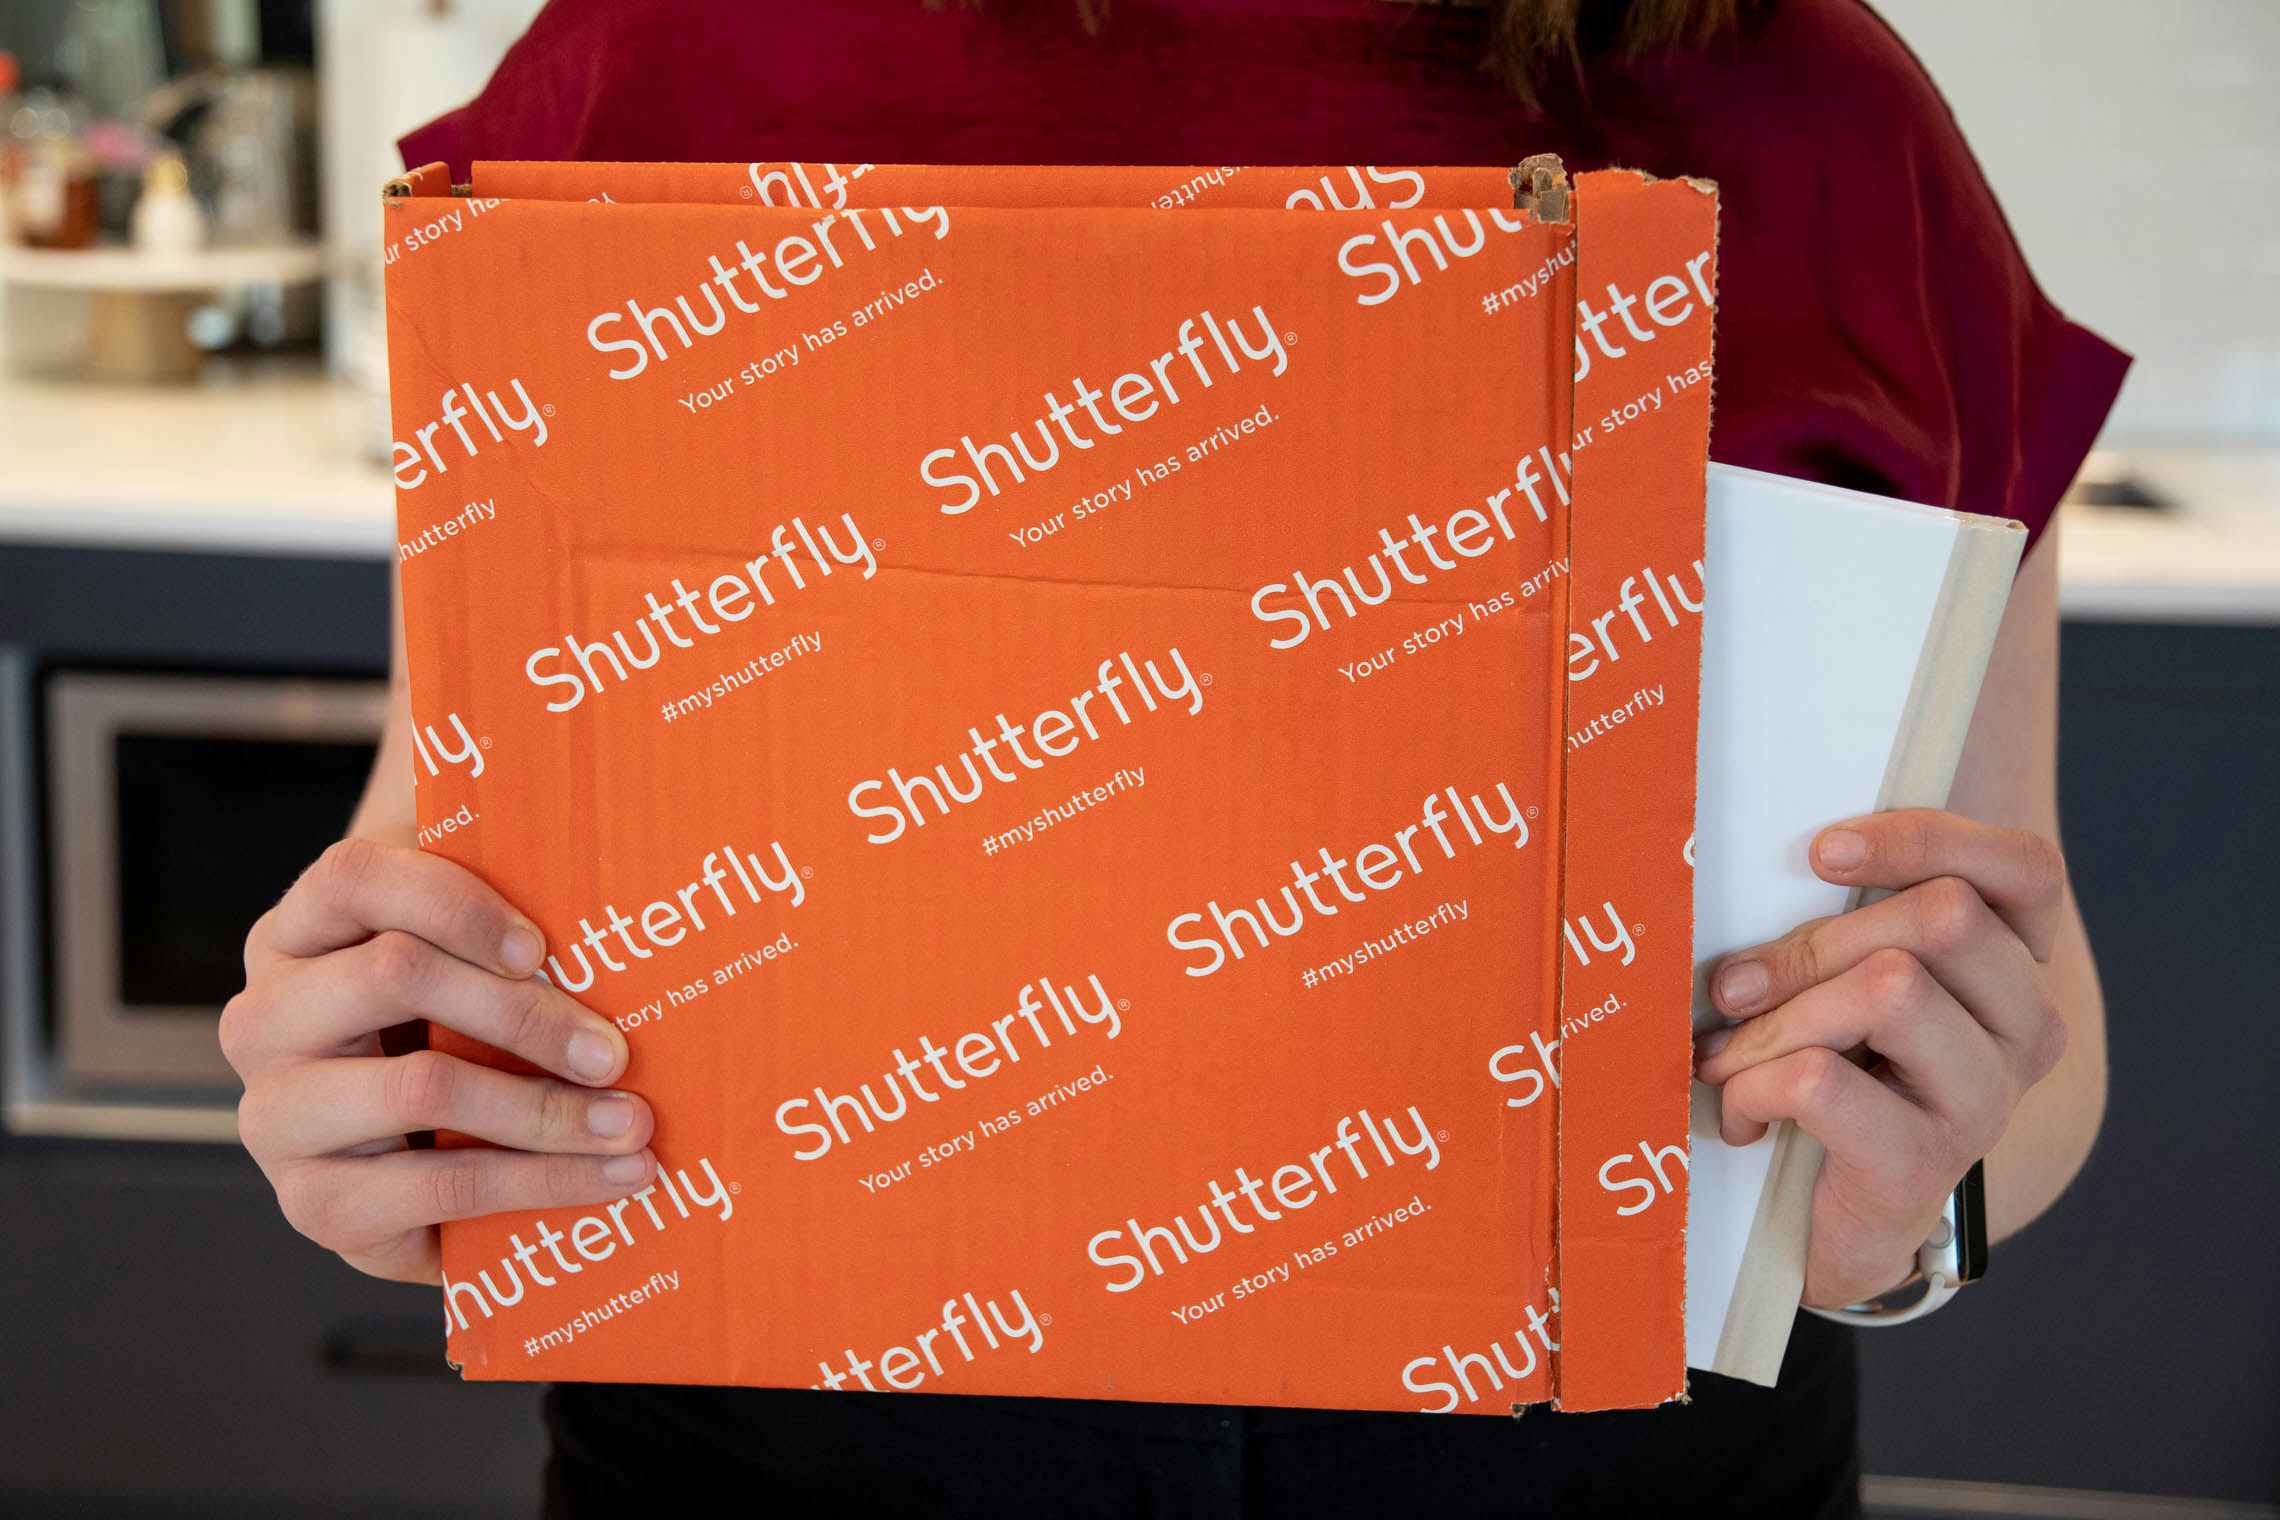 Shutterfuly box with a person pulling a book out of it.